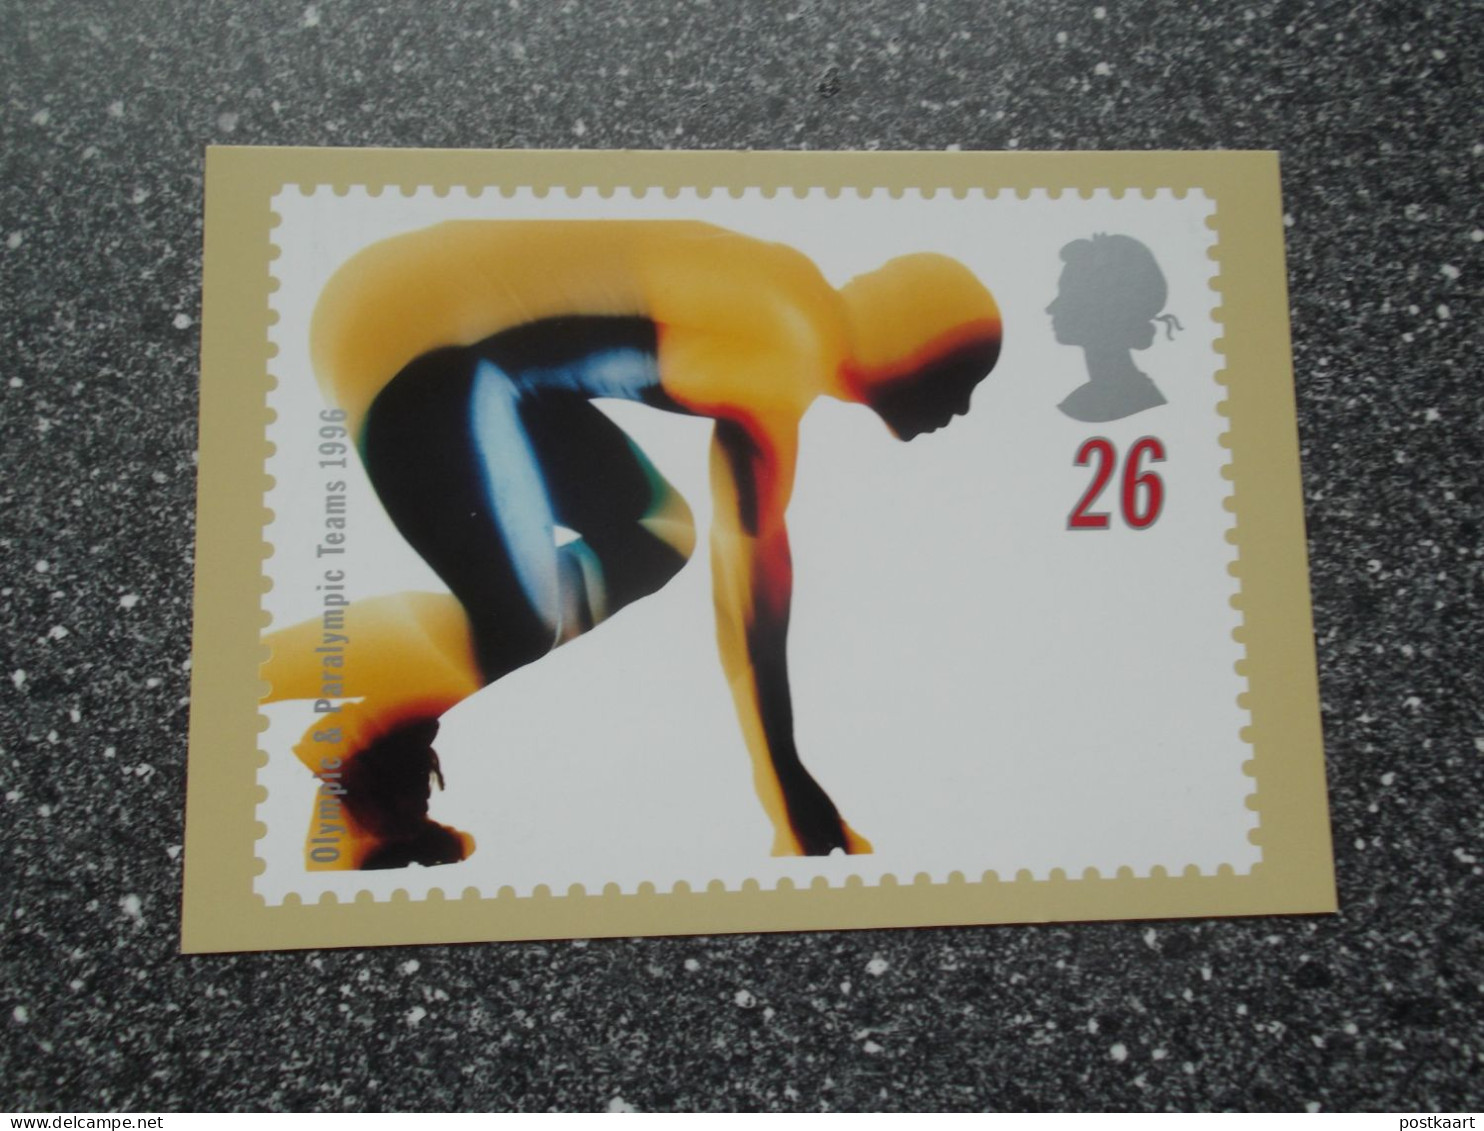 POSTCARD Stamp UK - Olympic & Paralympic Teams 1996 - 26 - Timbres (représentations)